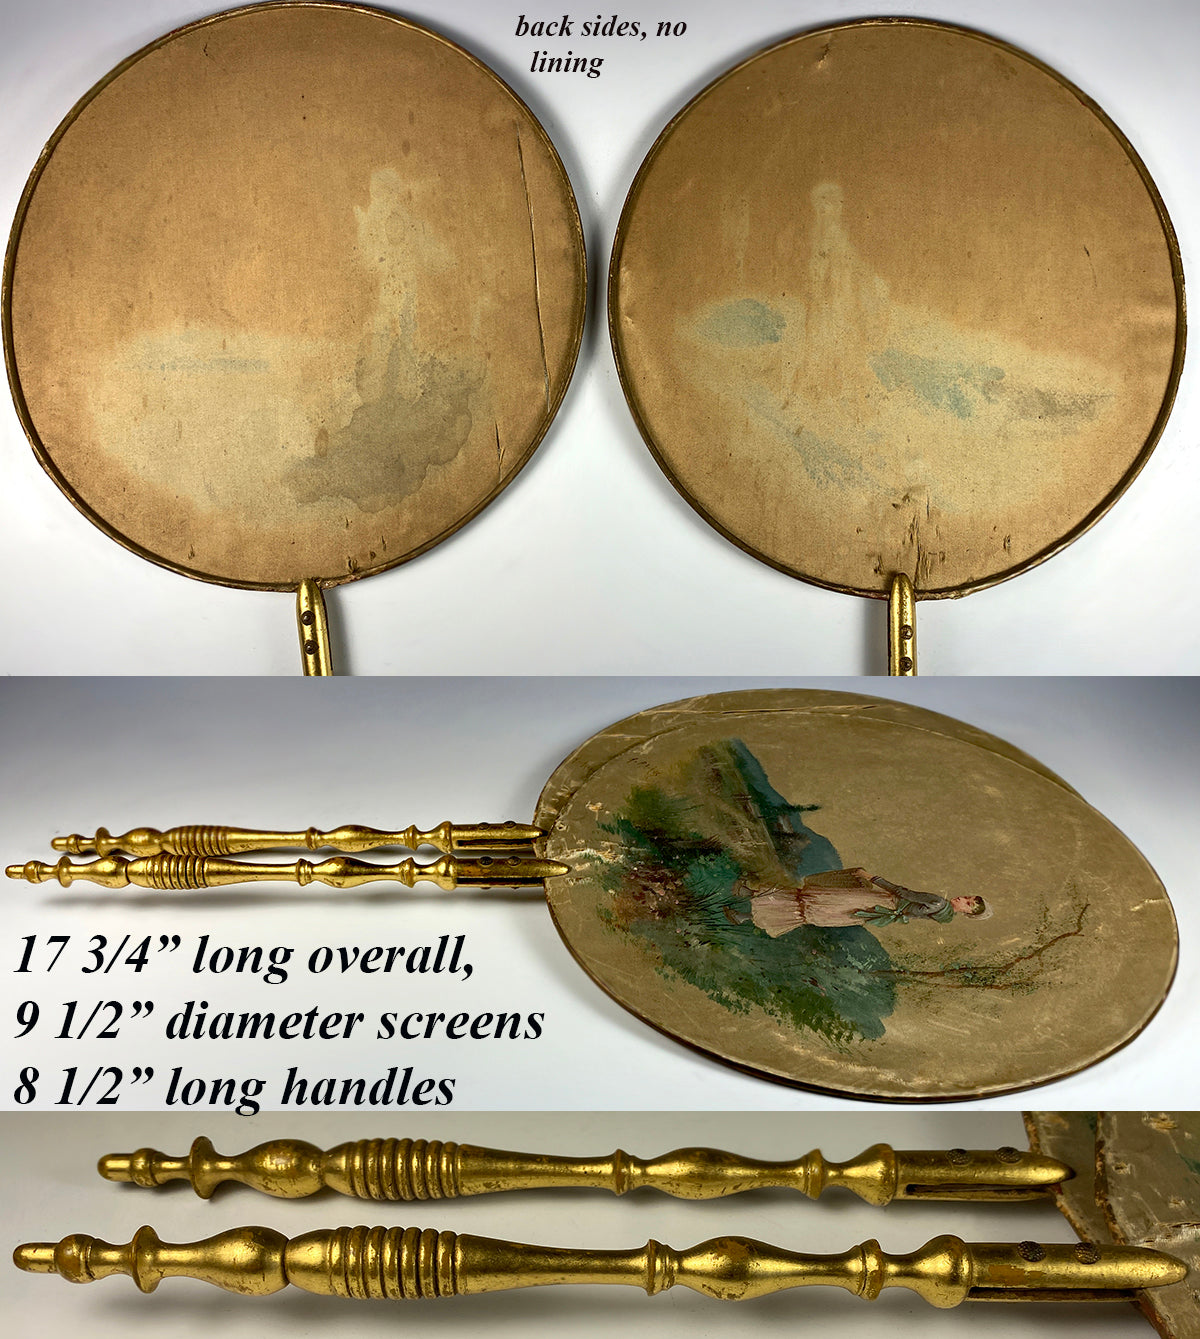 Pair (2) Hand Painted Silk French Face Screen Pair, Signed by Artist, Lathe-turned Handles